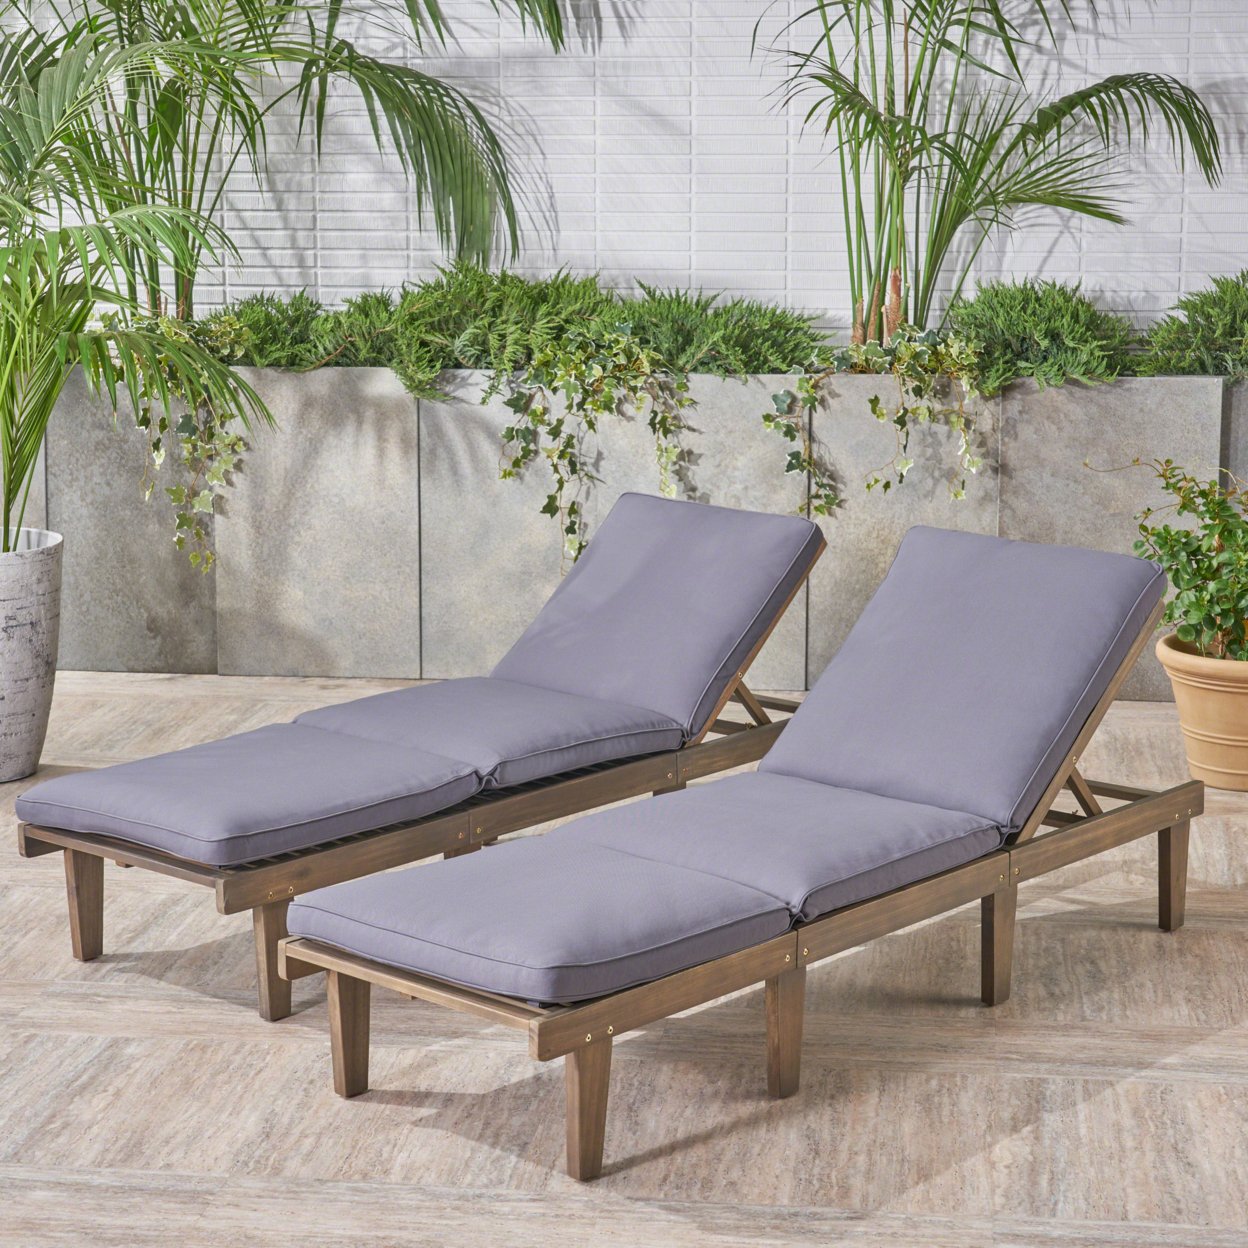 Alisa Outdoor Acacia Wood Chaise Lounge With Cushion, Gray And Dark Gray - Set Of 2